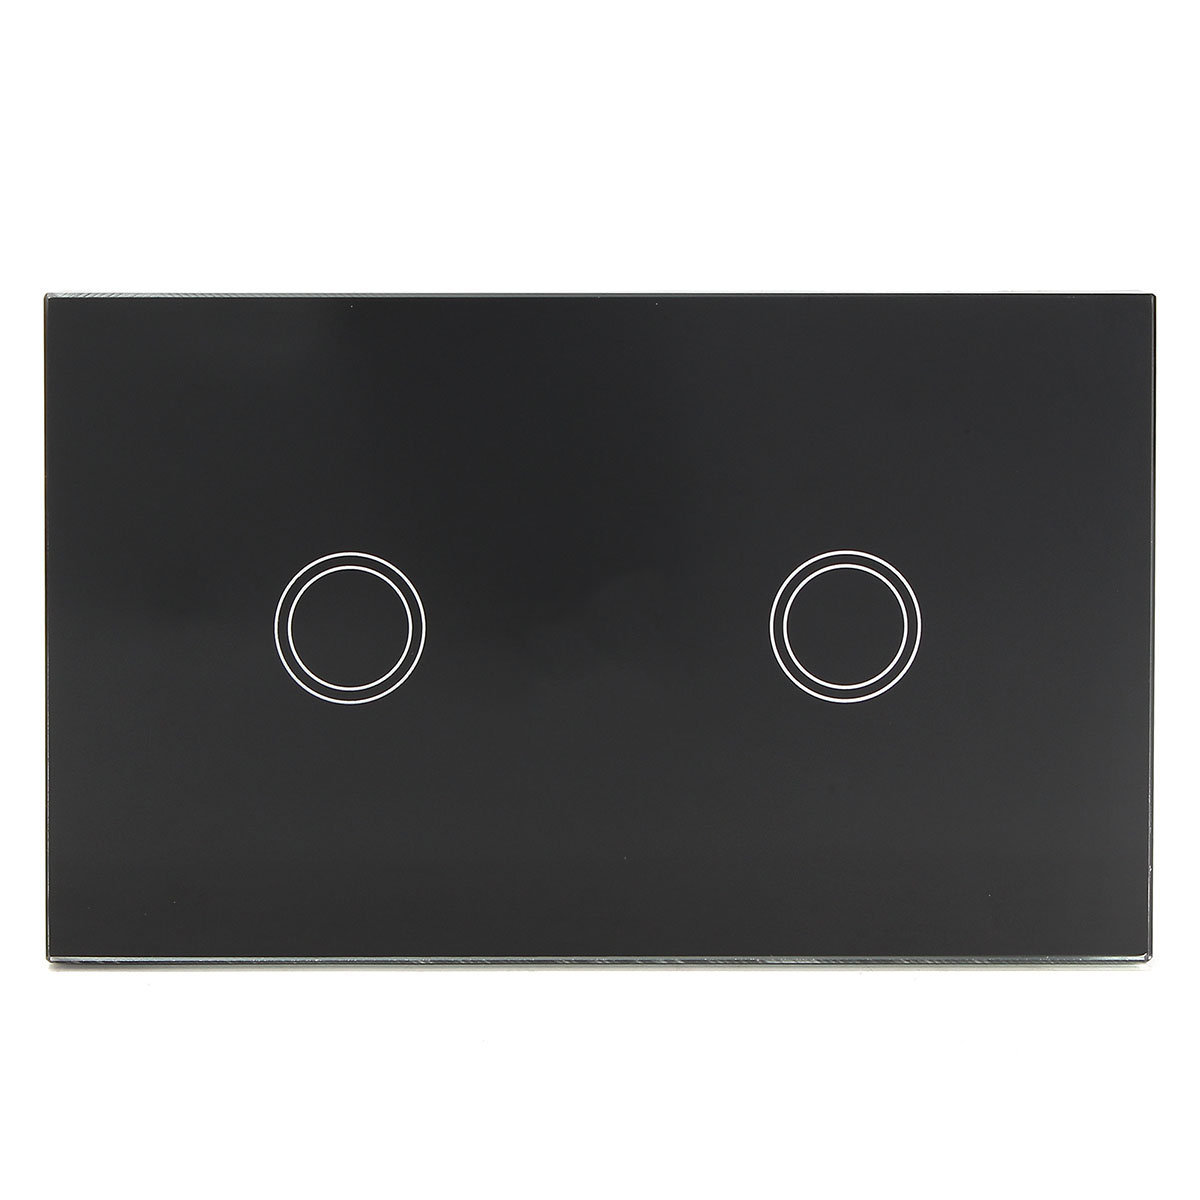 1-Way-2-Gang-Crystal-Glass-Remote-Panel-Touch-LED-Light-Switches-Controller-1134494-4